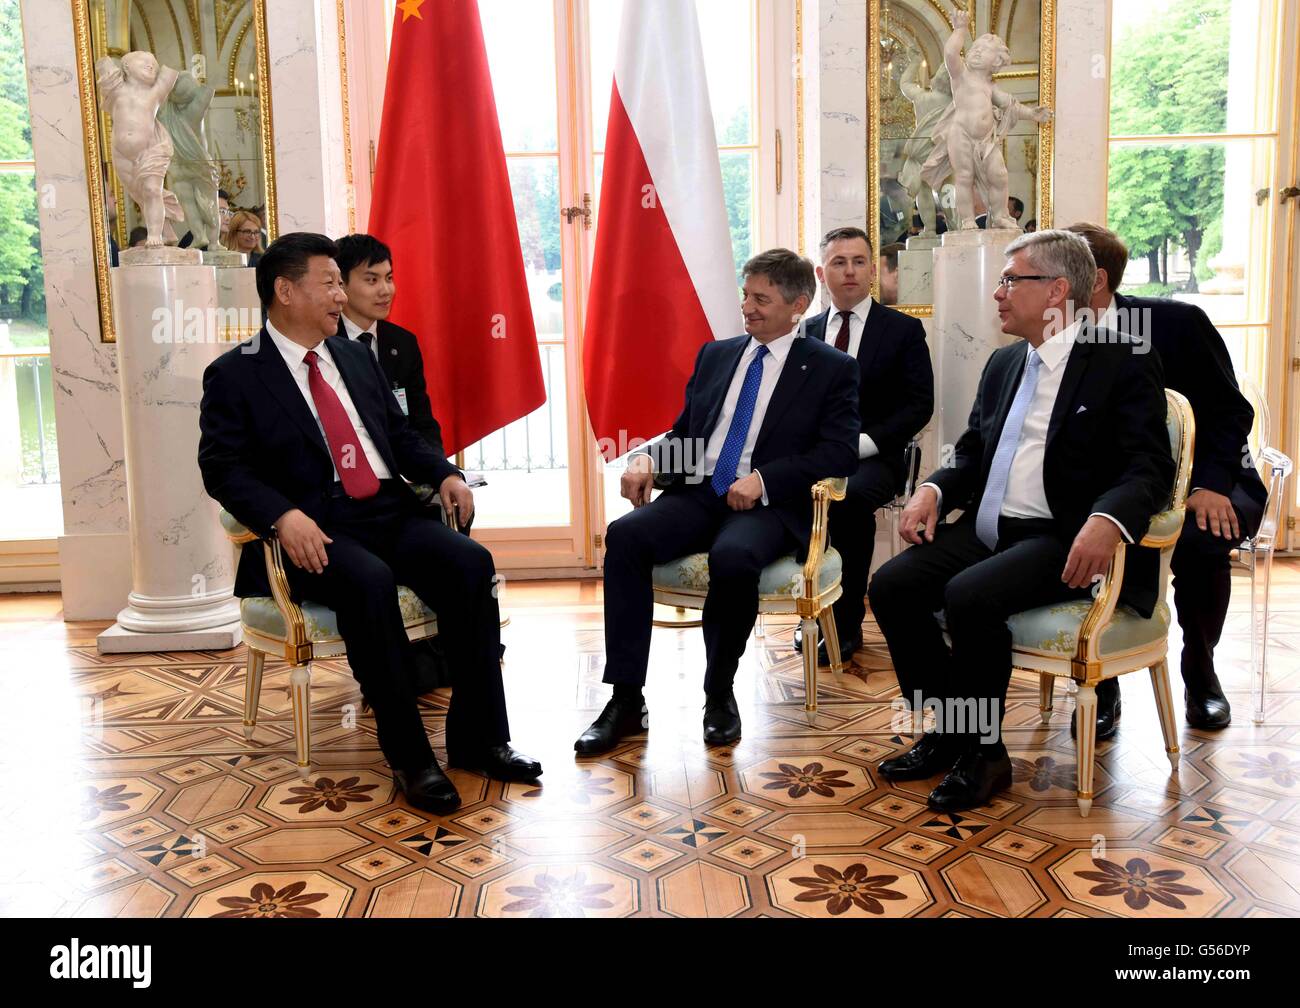 Warsaw, Poland. 20th June, 2016. Chinese President Xi Jinping (L front) meets with Marek Kuchcinski (C front), marshal of the lower chamber of the Polish parliament (Sejm), and Marshal of Senate Stanislaw Karczewski (R front) in Warsaw, Poland, June 20, 2016. © Rao Aimin/Xinhua/Alamy Live News Stock Photo